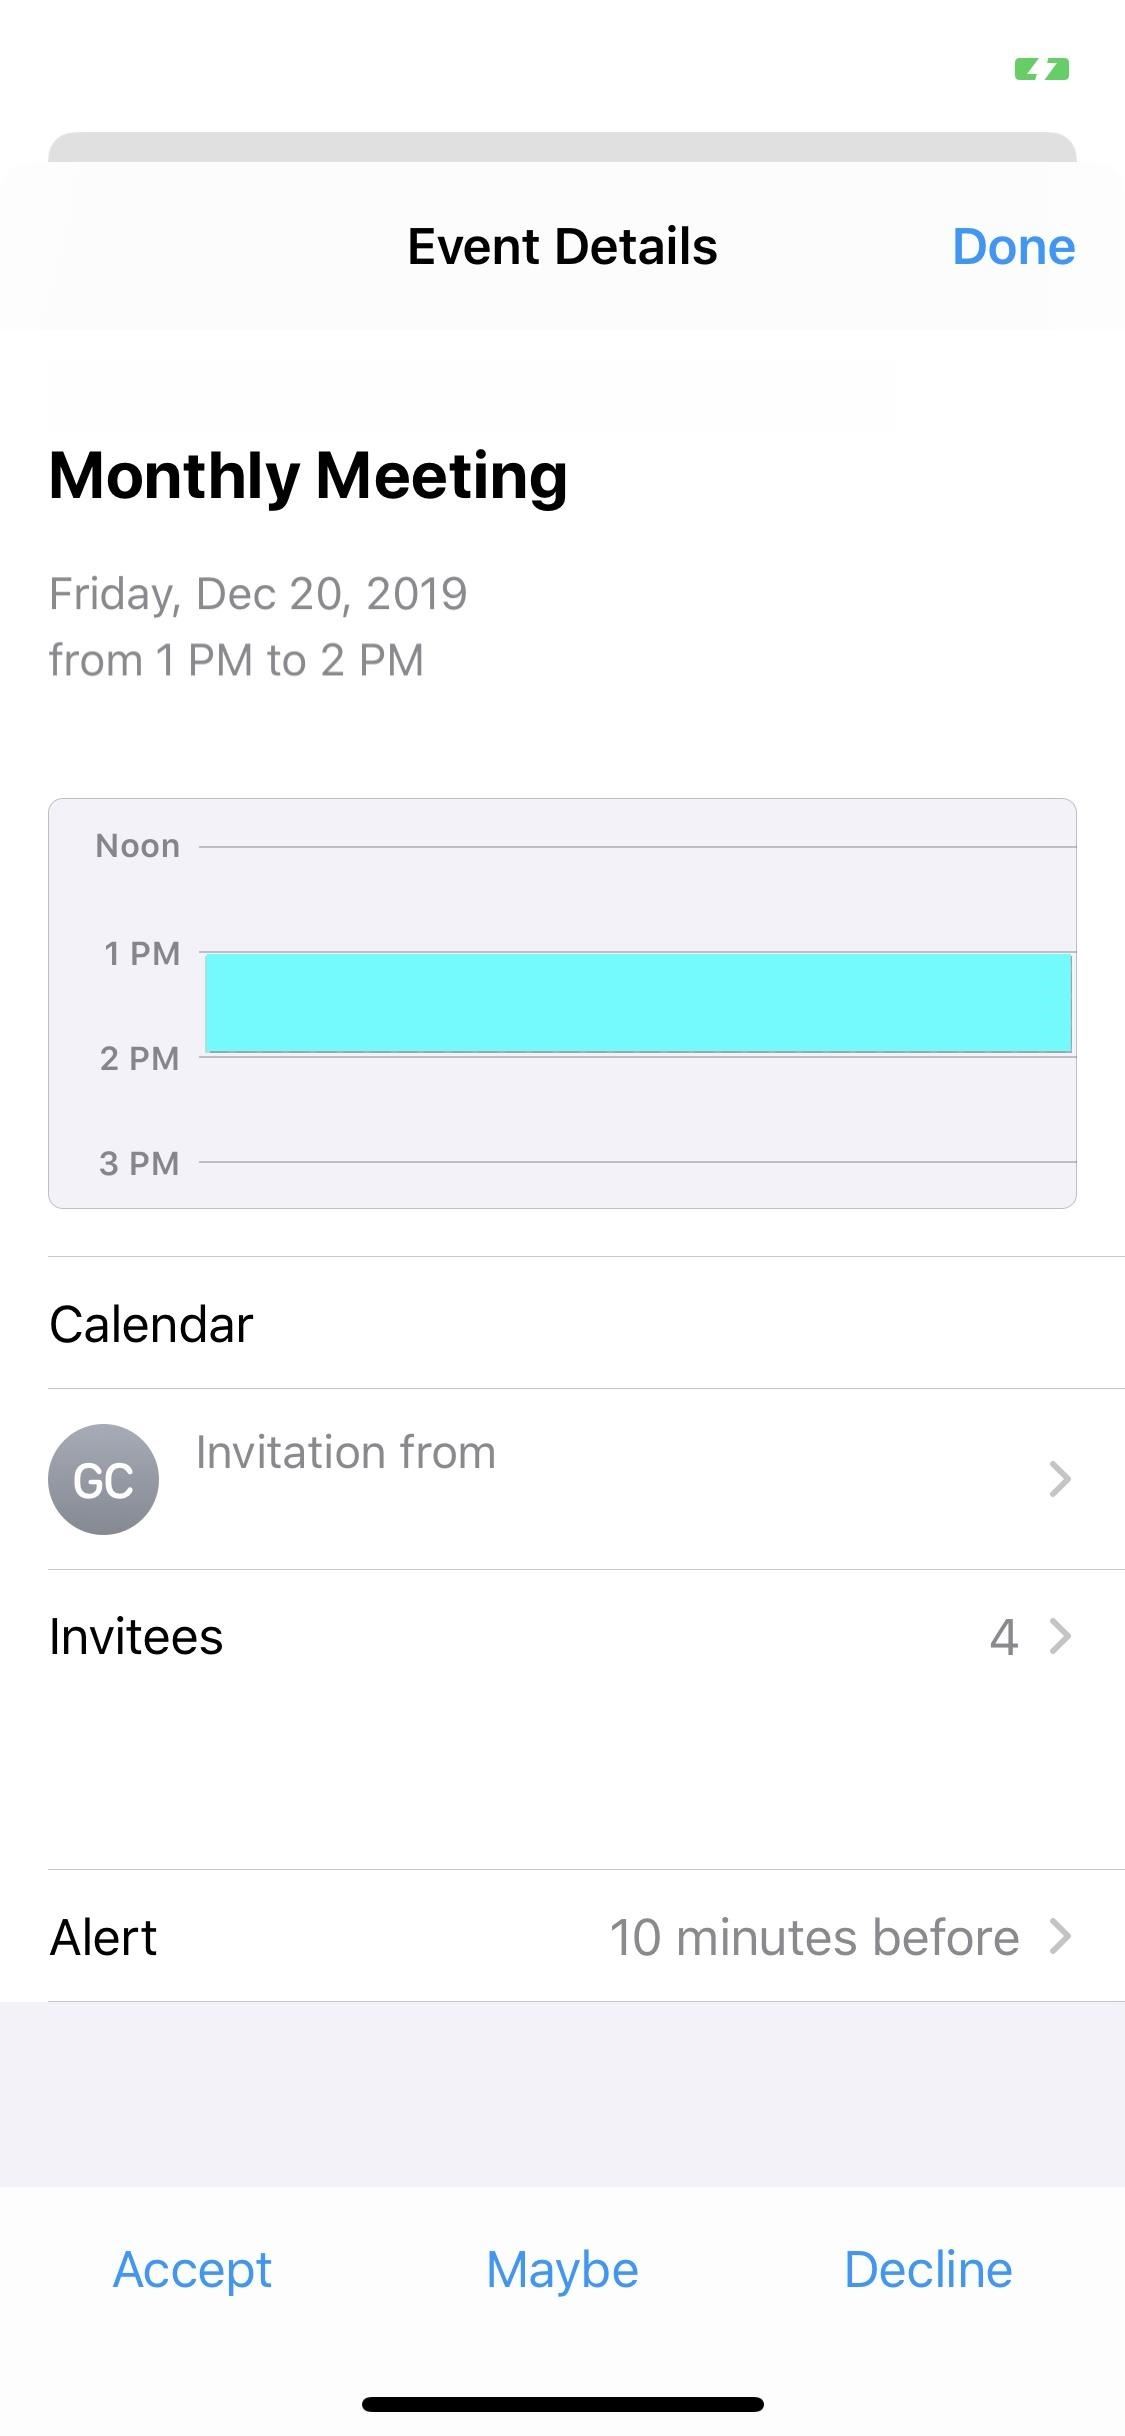 View Calendar Events & Invites in Edison Mail While Checking Your Email